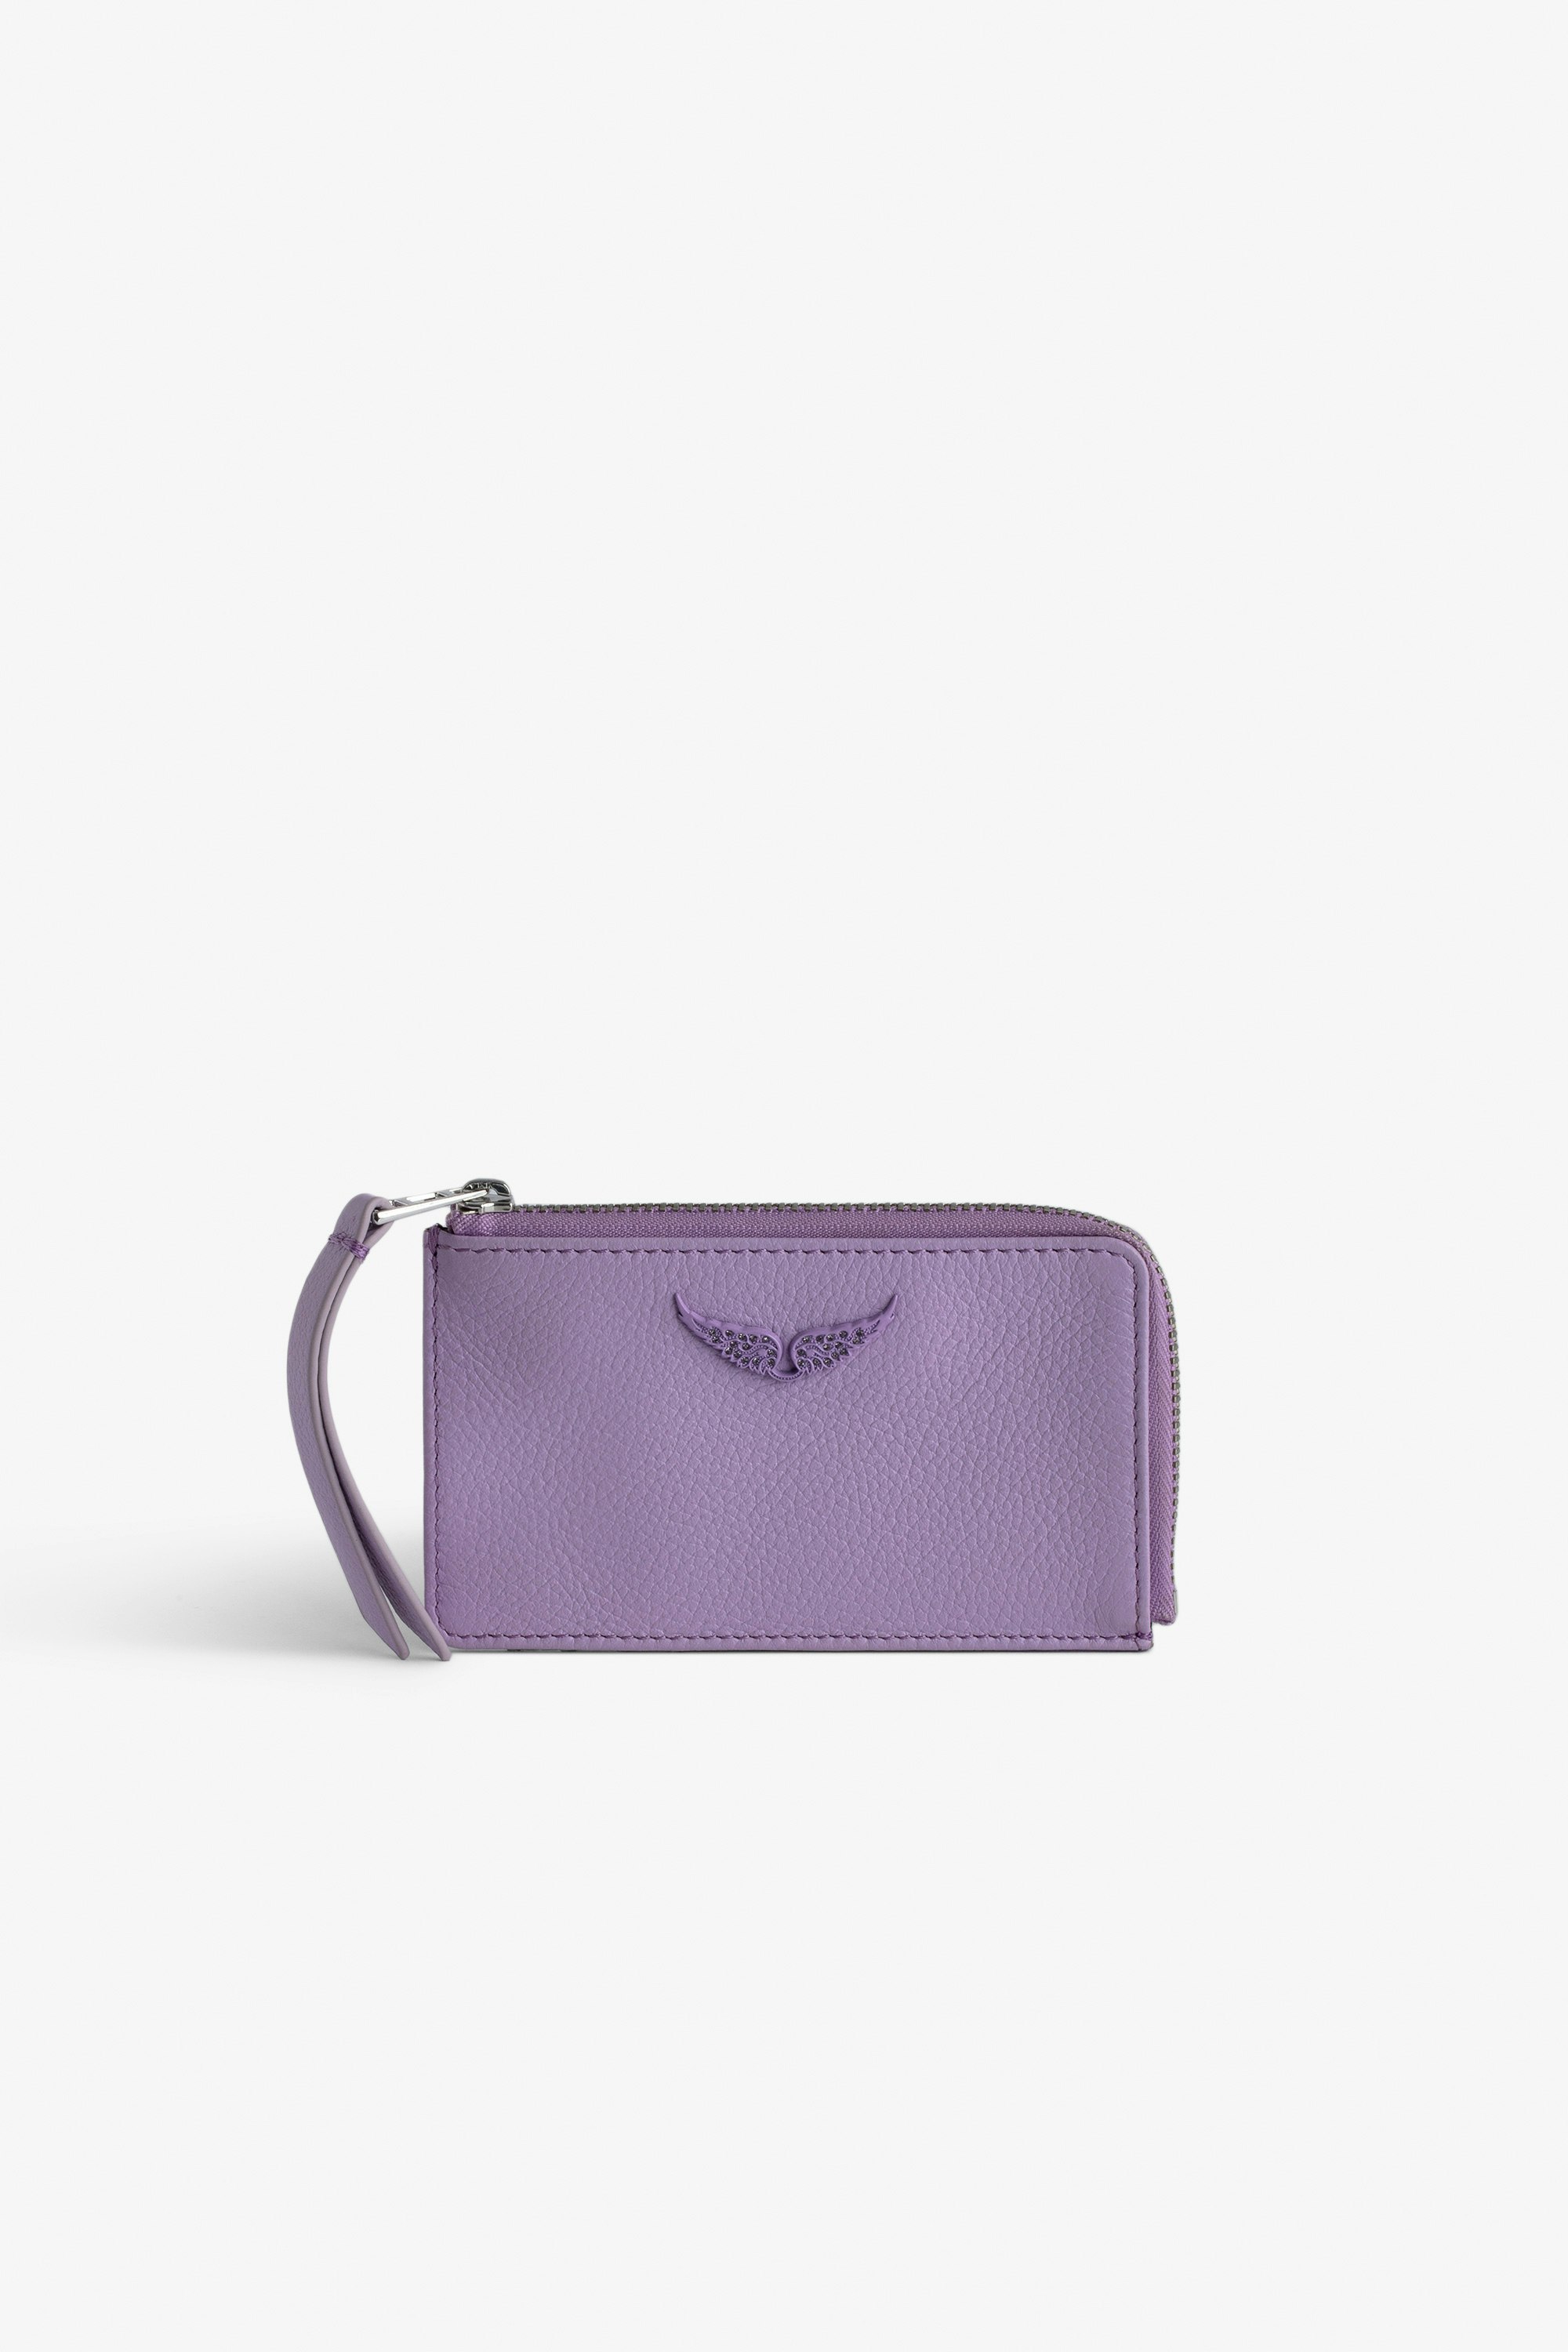 ZV Card Card Holder - Purple grained leather card holder with diamanté wings charm.